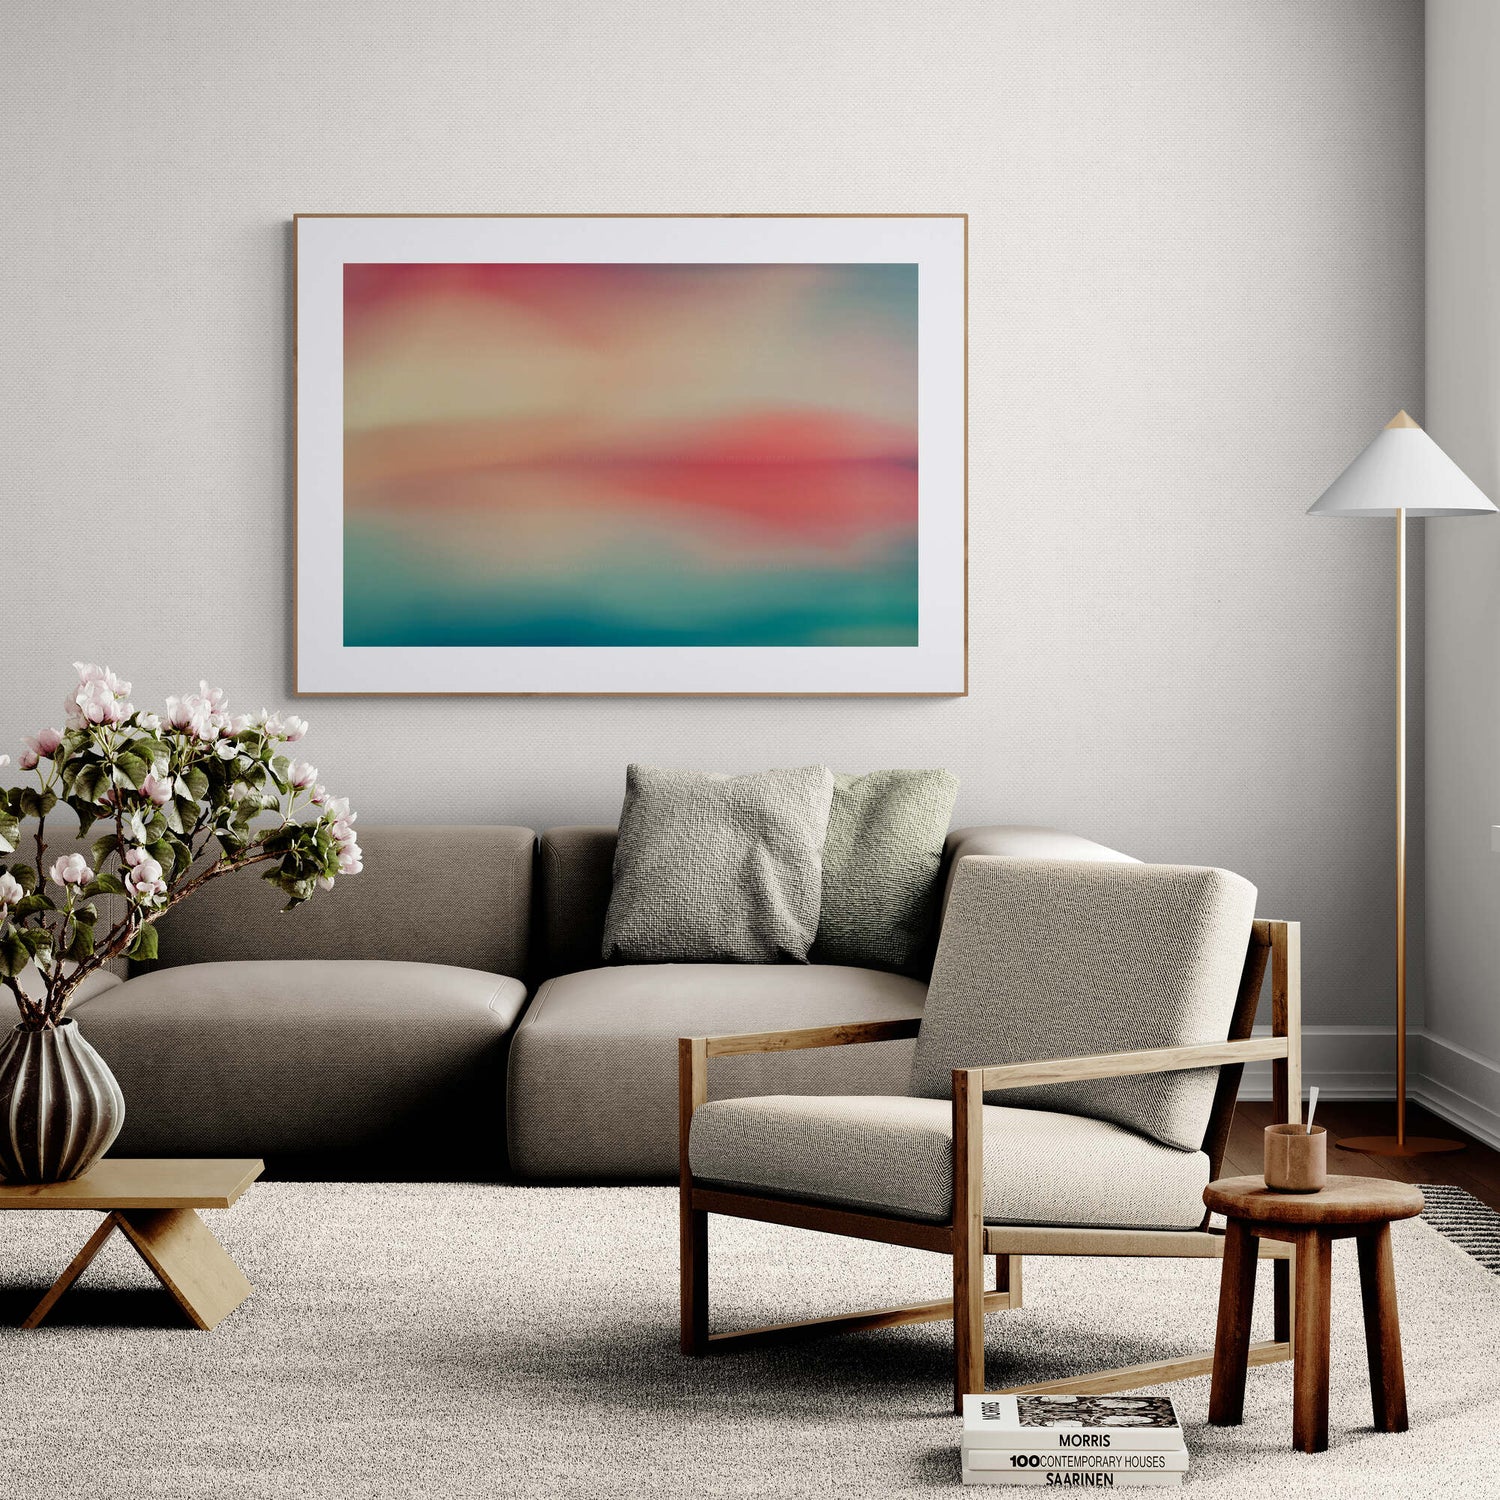 Colorful framed abstract print in a bedroom